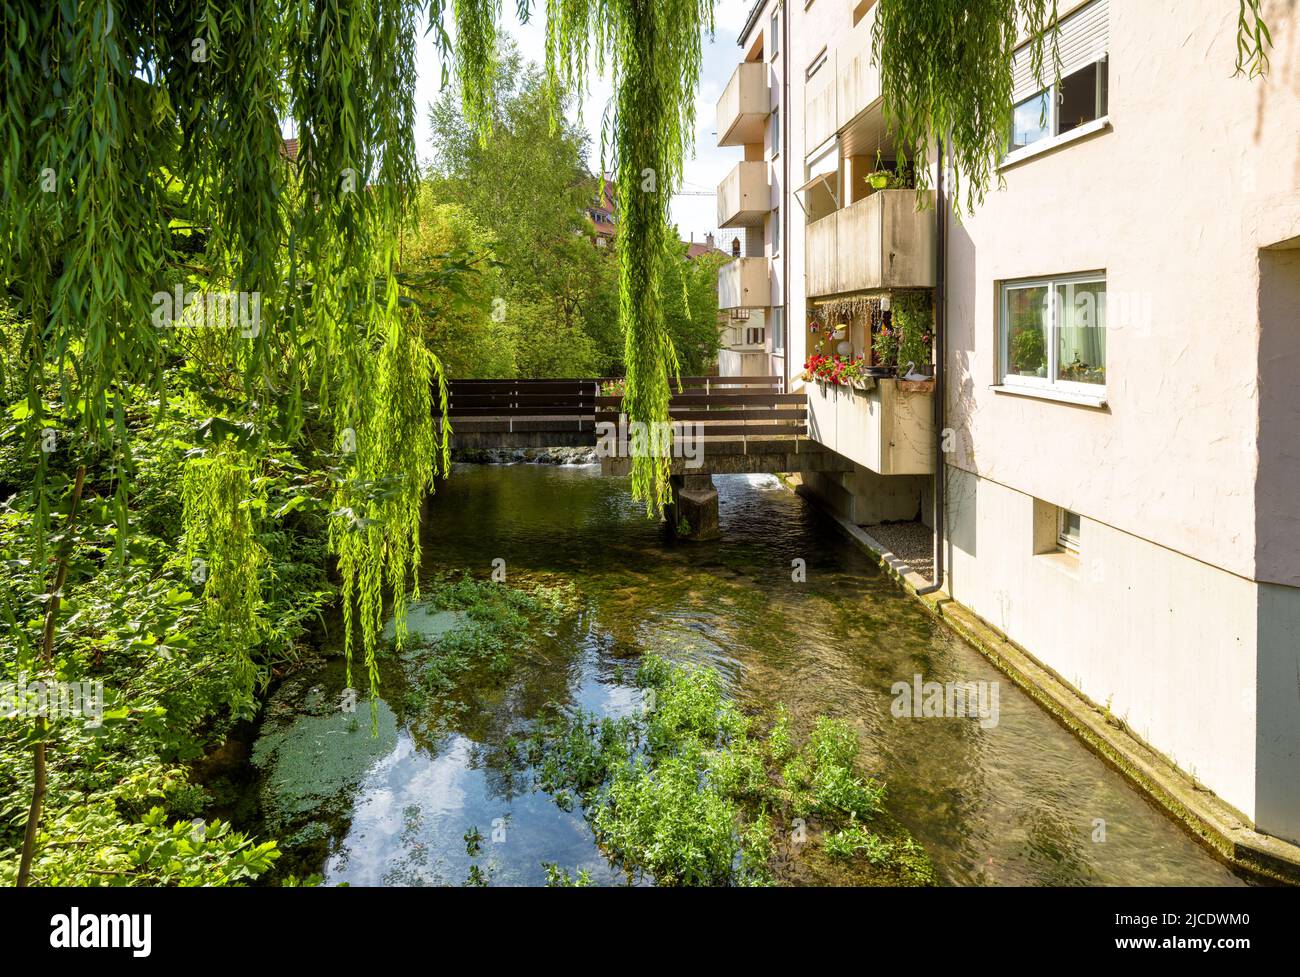 House in town of Ulm, Baden-Wurttemberg, Germany. Scenic view of residential building by water canal in summer. Historical Fisherman Quarter in Ulm ci Stock Photo